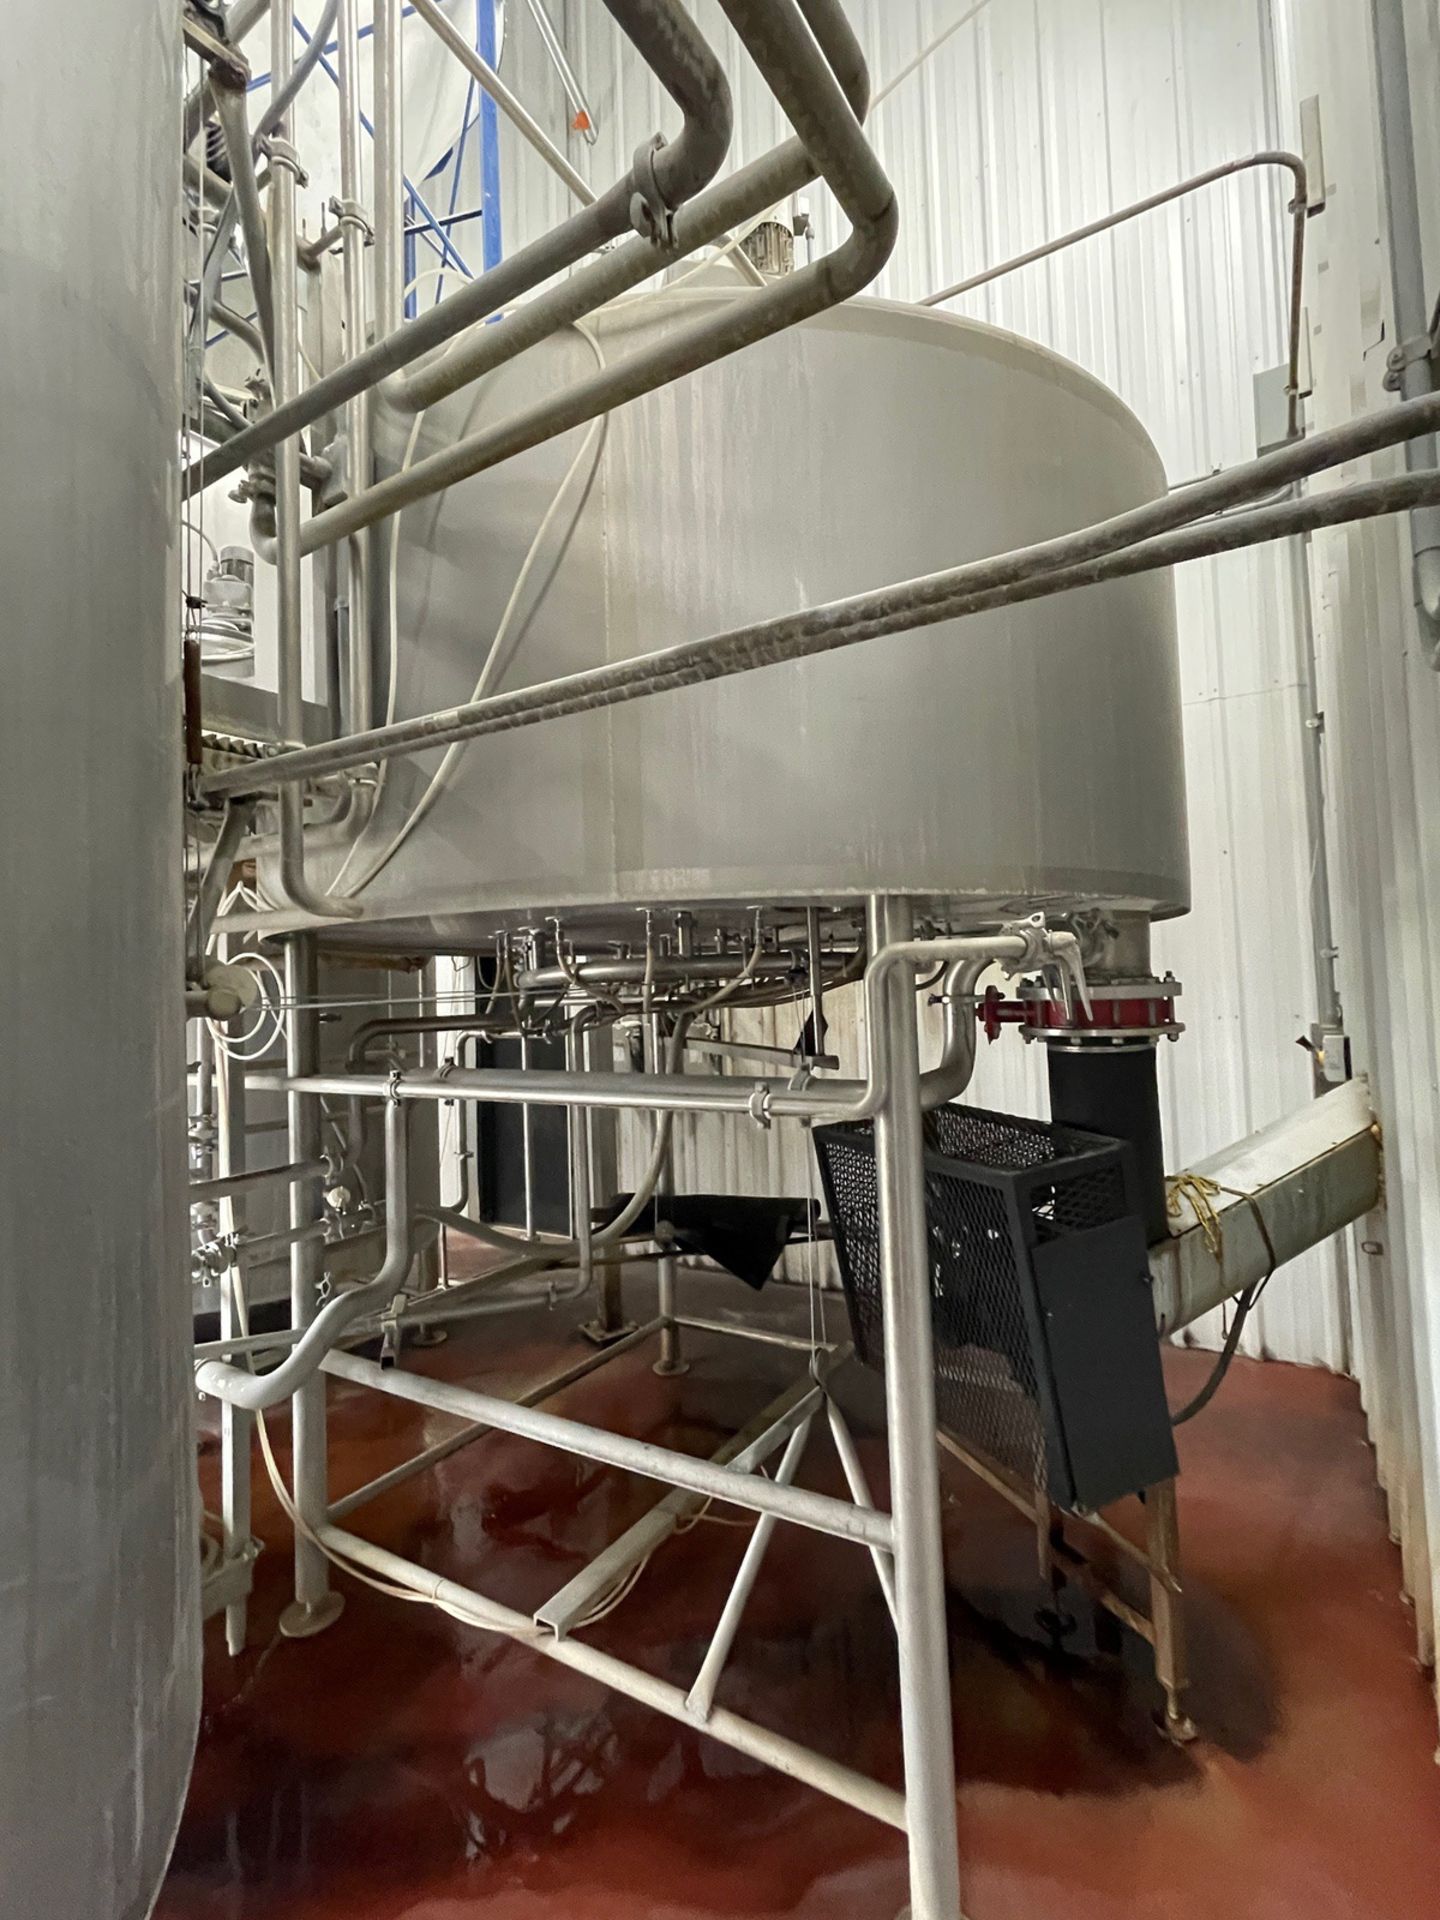 2012 Sprinkman 30 BBL 5-Vessel Brewhouse, with Grain Mash Tun (33 BBLS, Approx. 6.5 | Rig Fee $16000 - Image 47 of 108